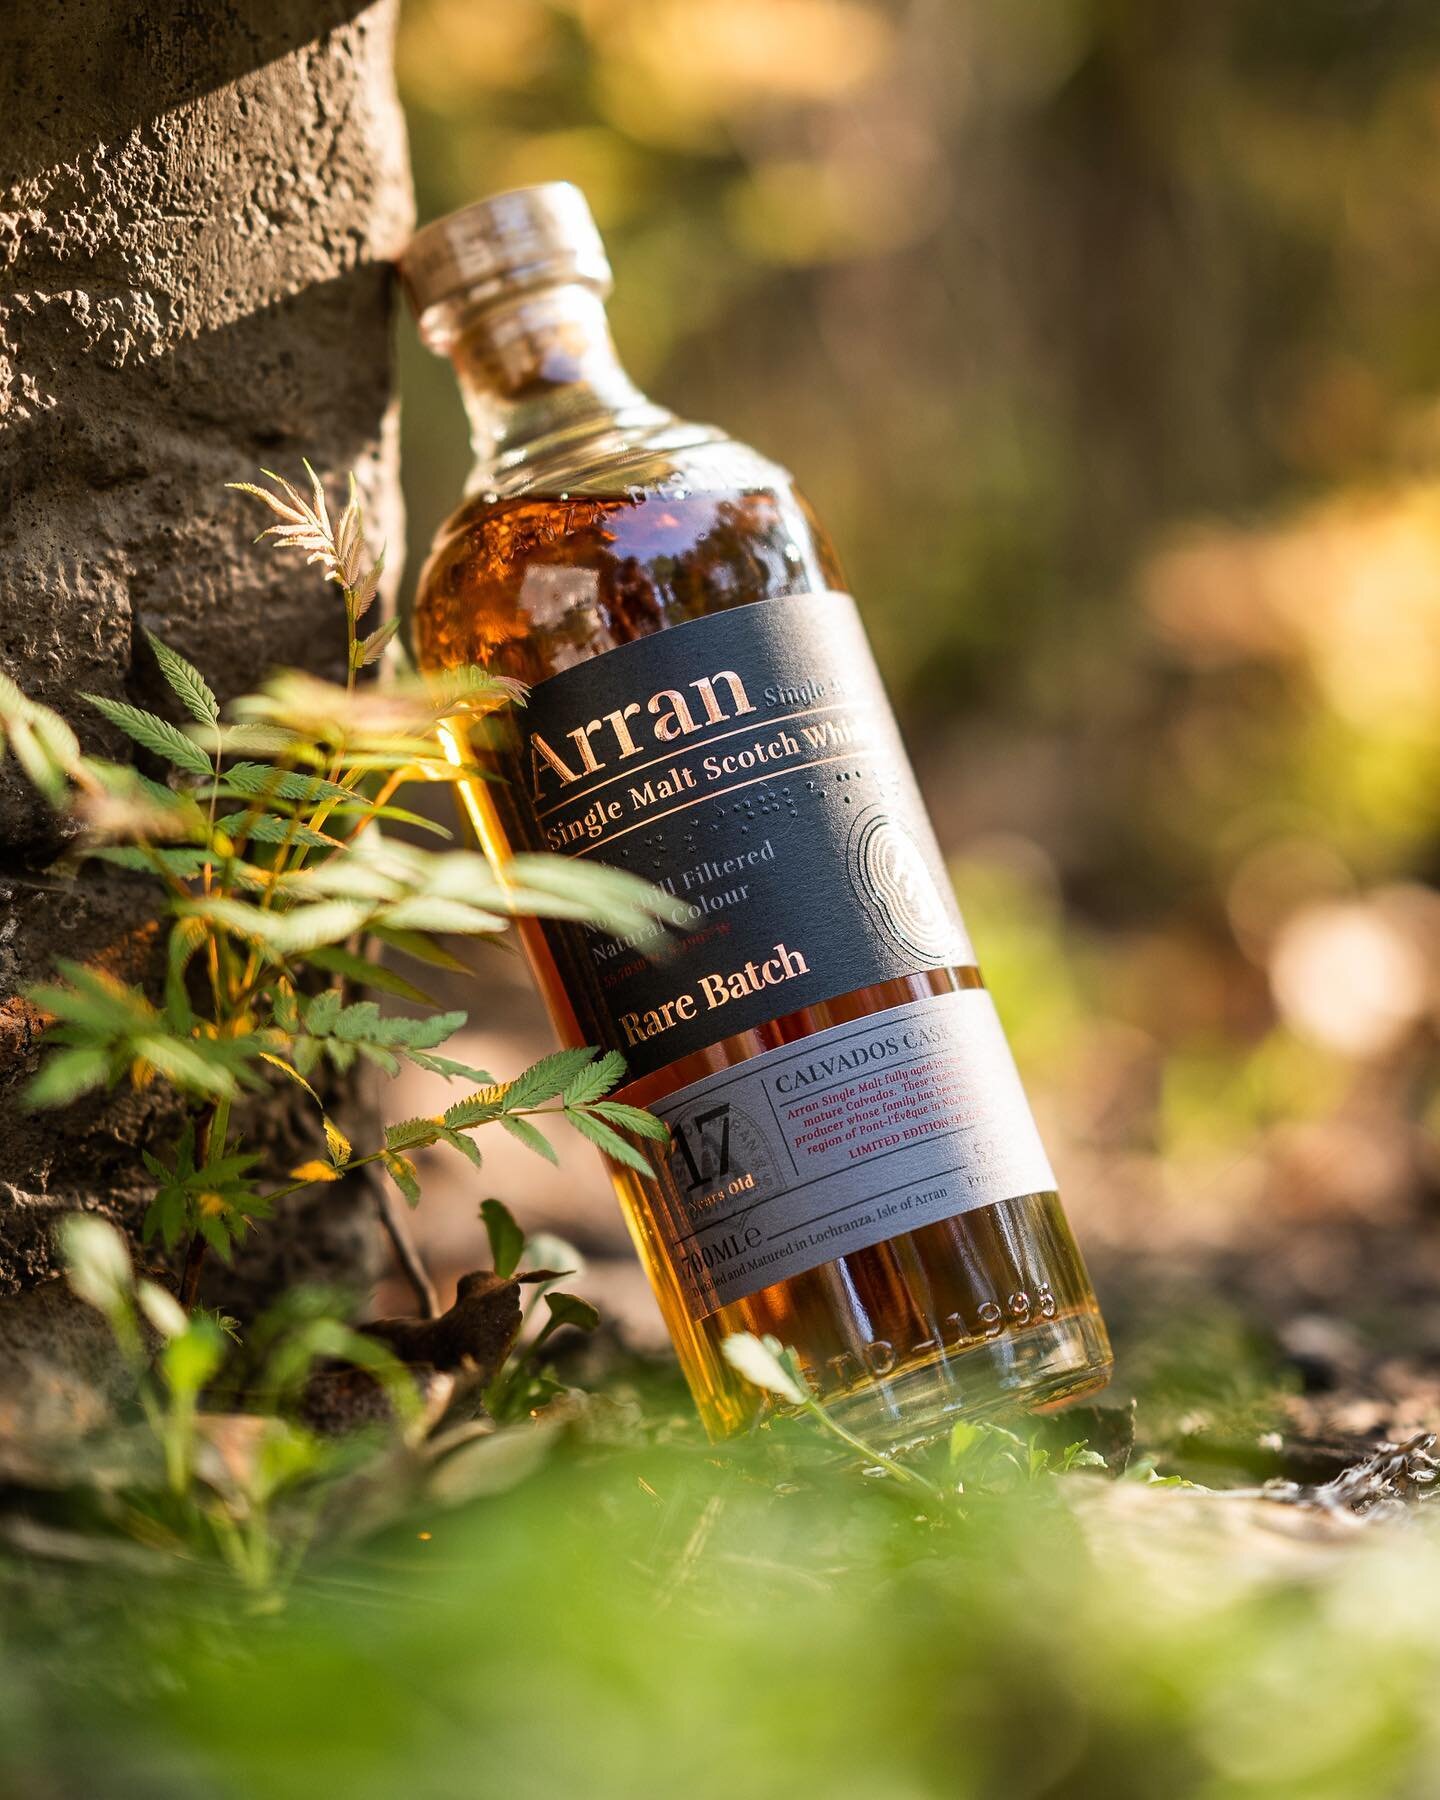 It&rsquo;s no secret that we&rsquo;re big fans of @arranwhiskyofficial, they provide quality options all through their core range and every once in a while release a special treat just like this! A 17 year old Rare Batch that has been fully matured i